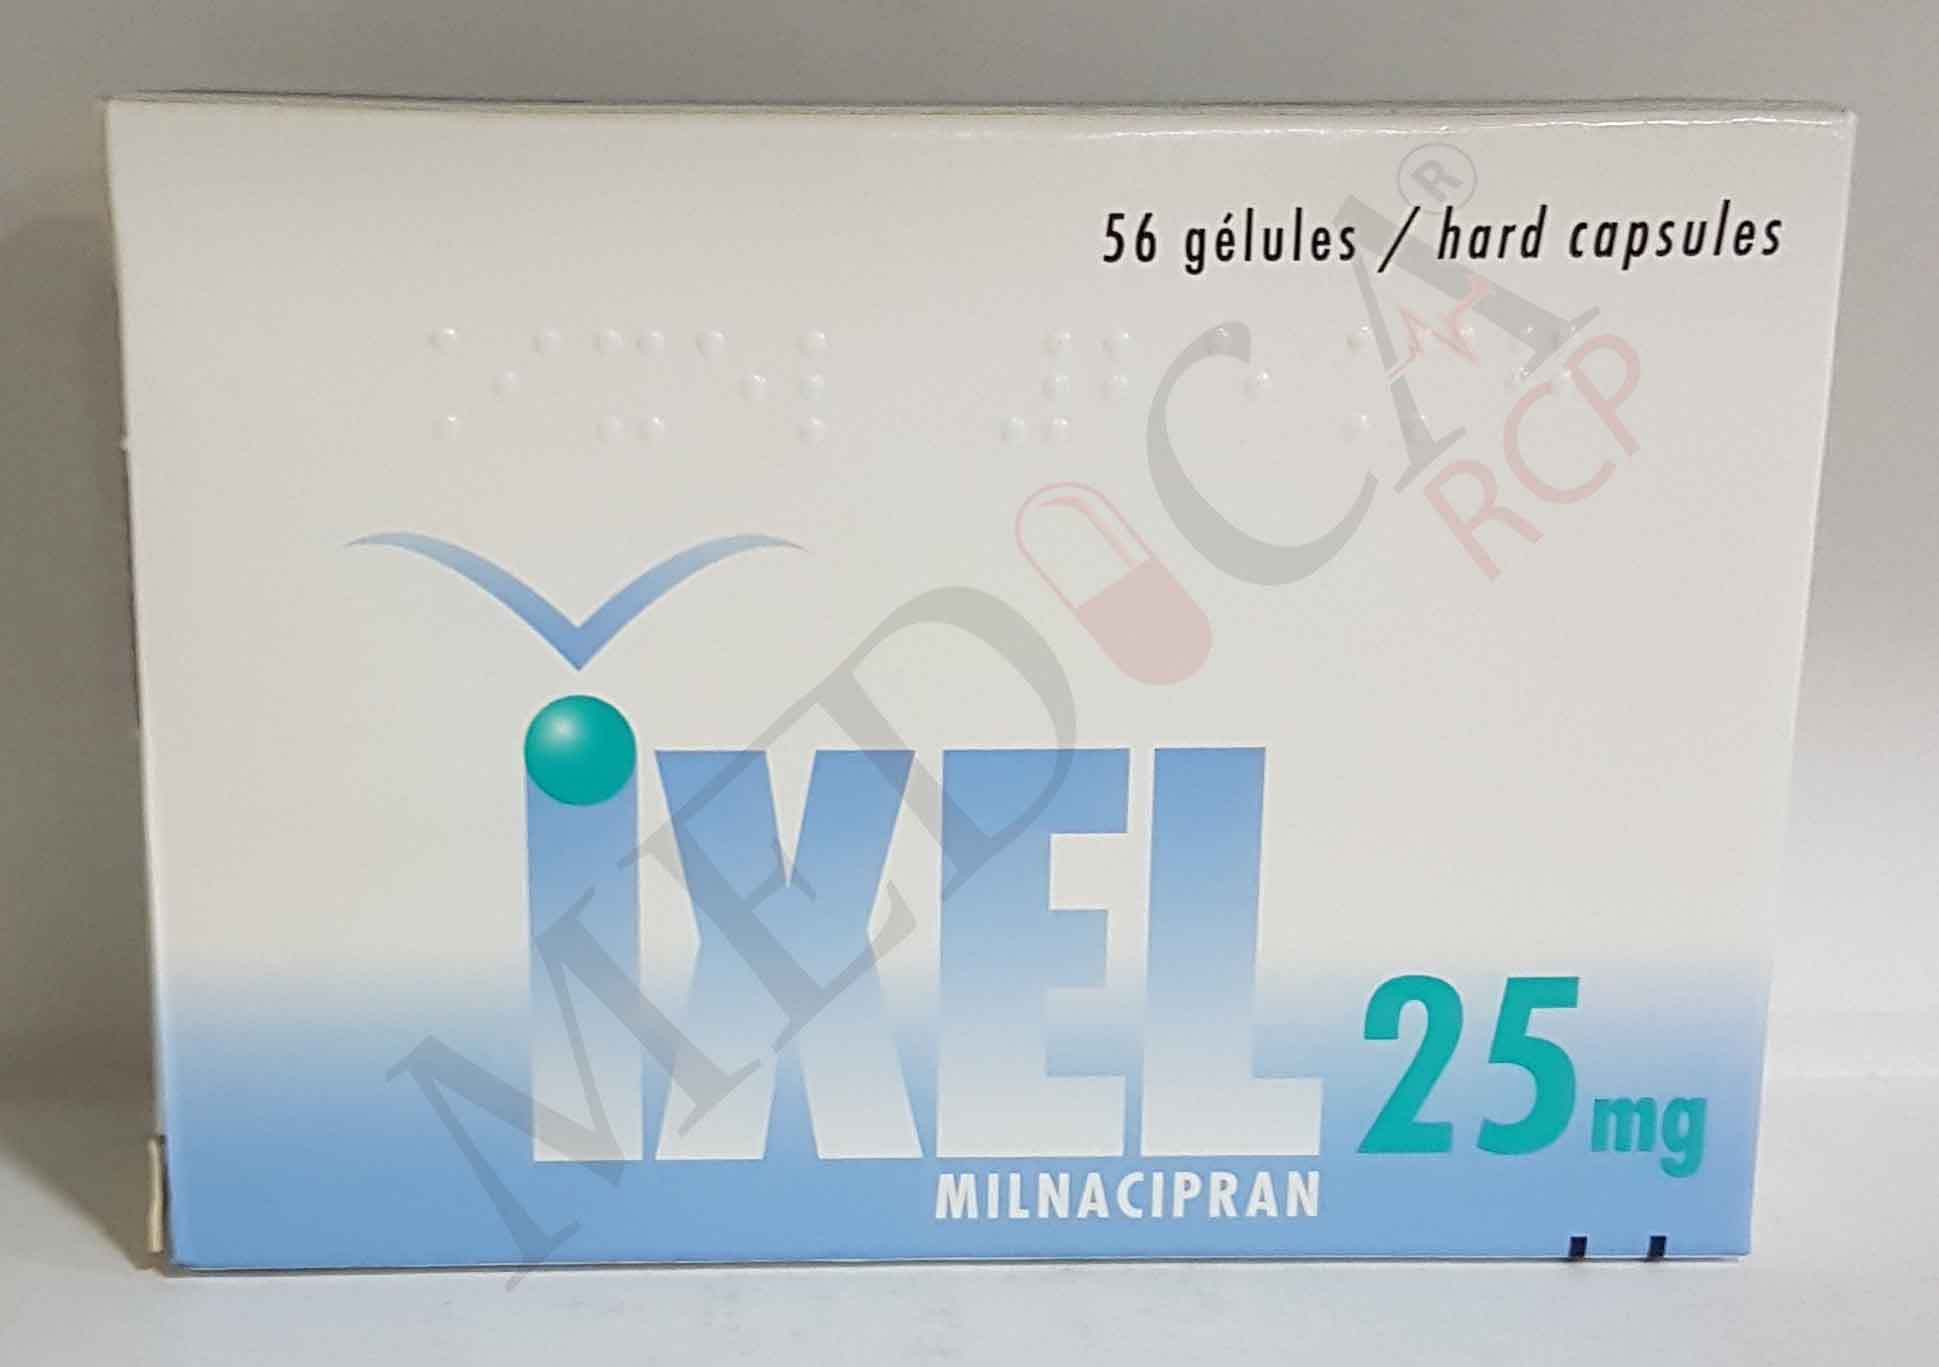 Medica RCP Ixel 25mg Capsules Indications Side Effects